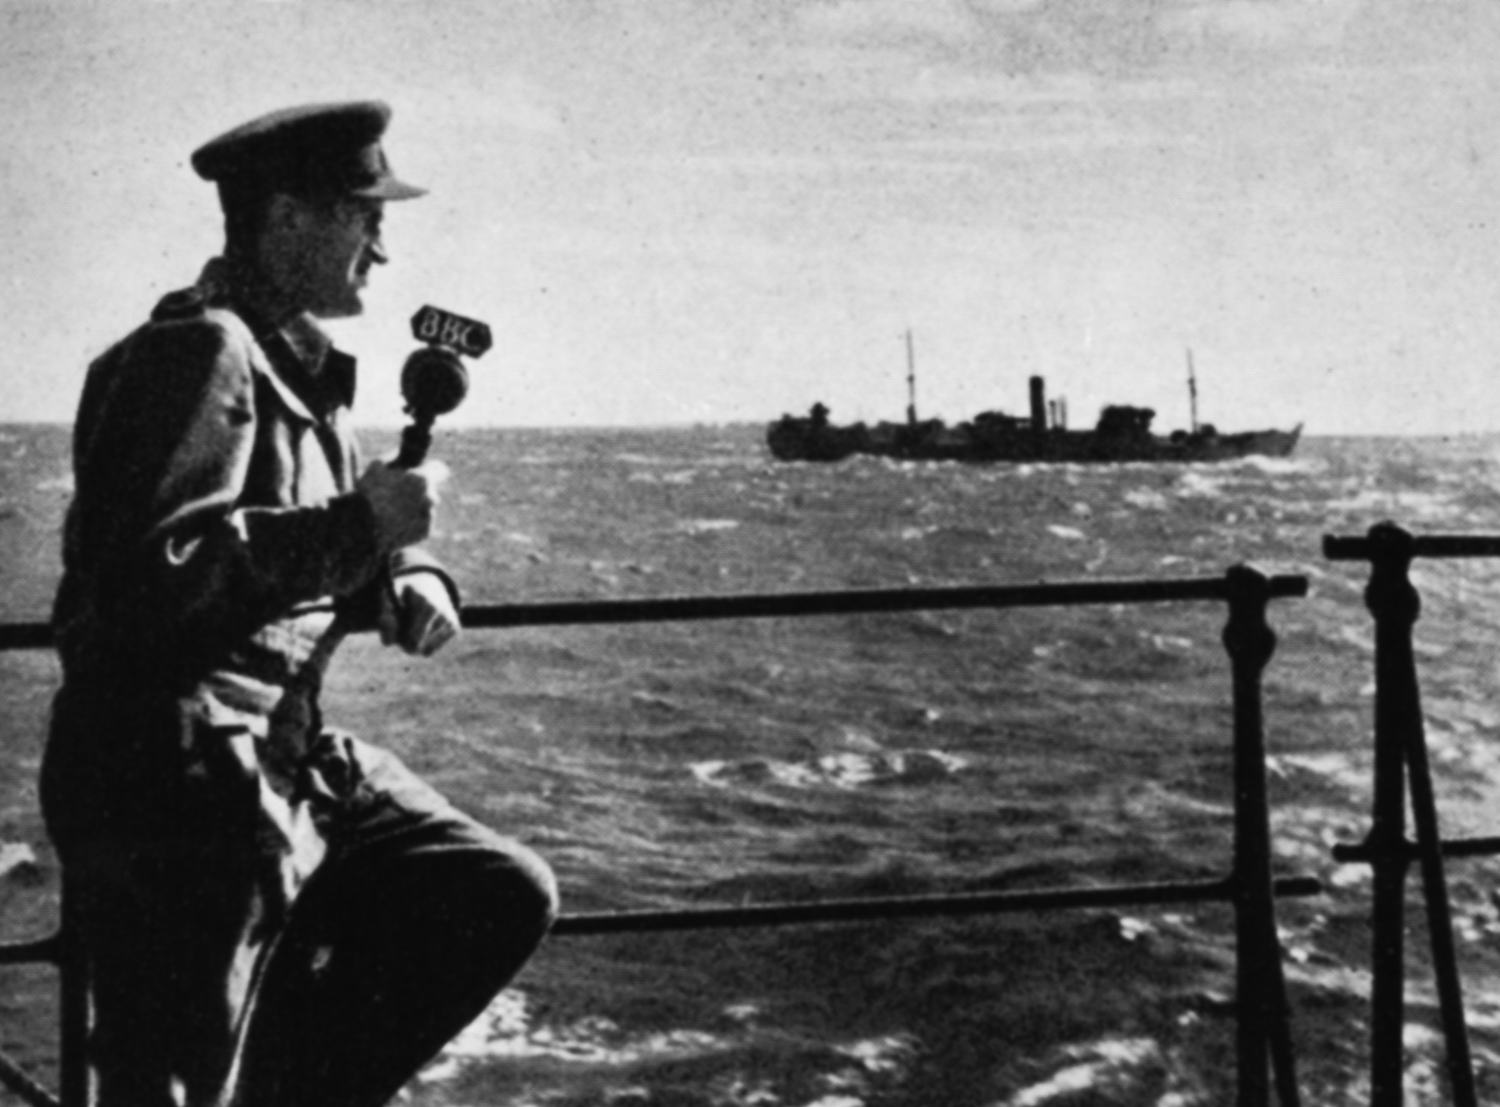 A man on a ship with a microphone